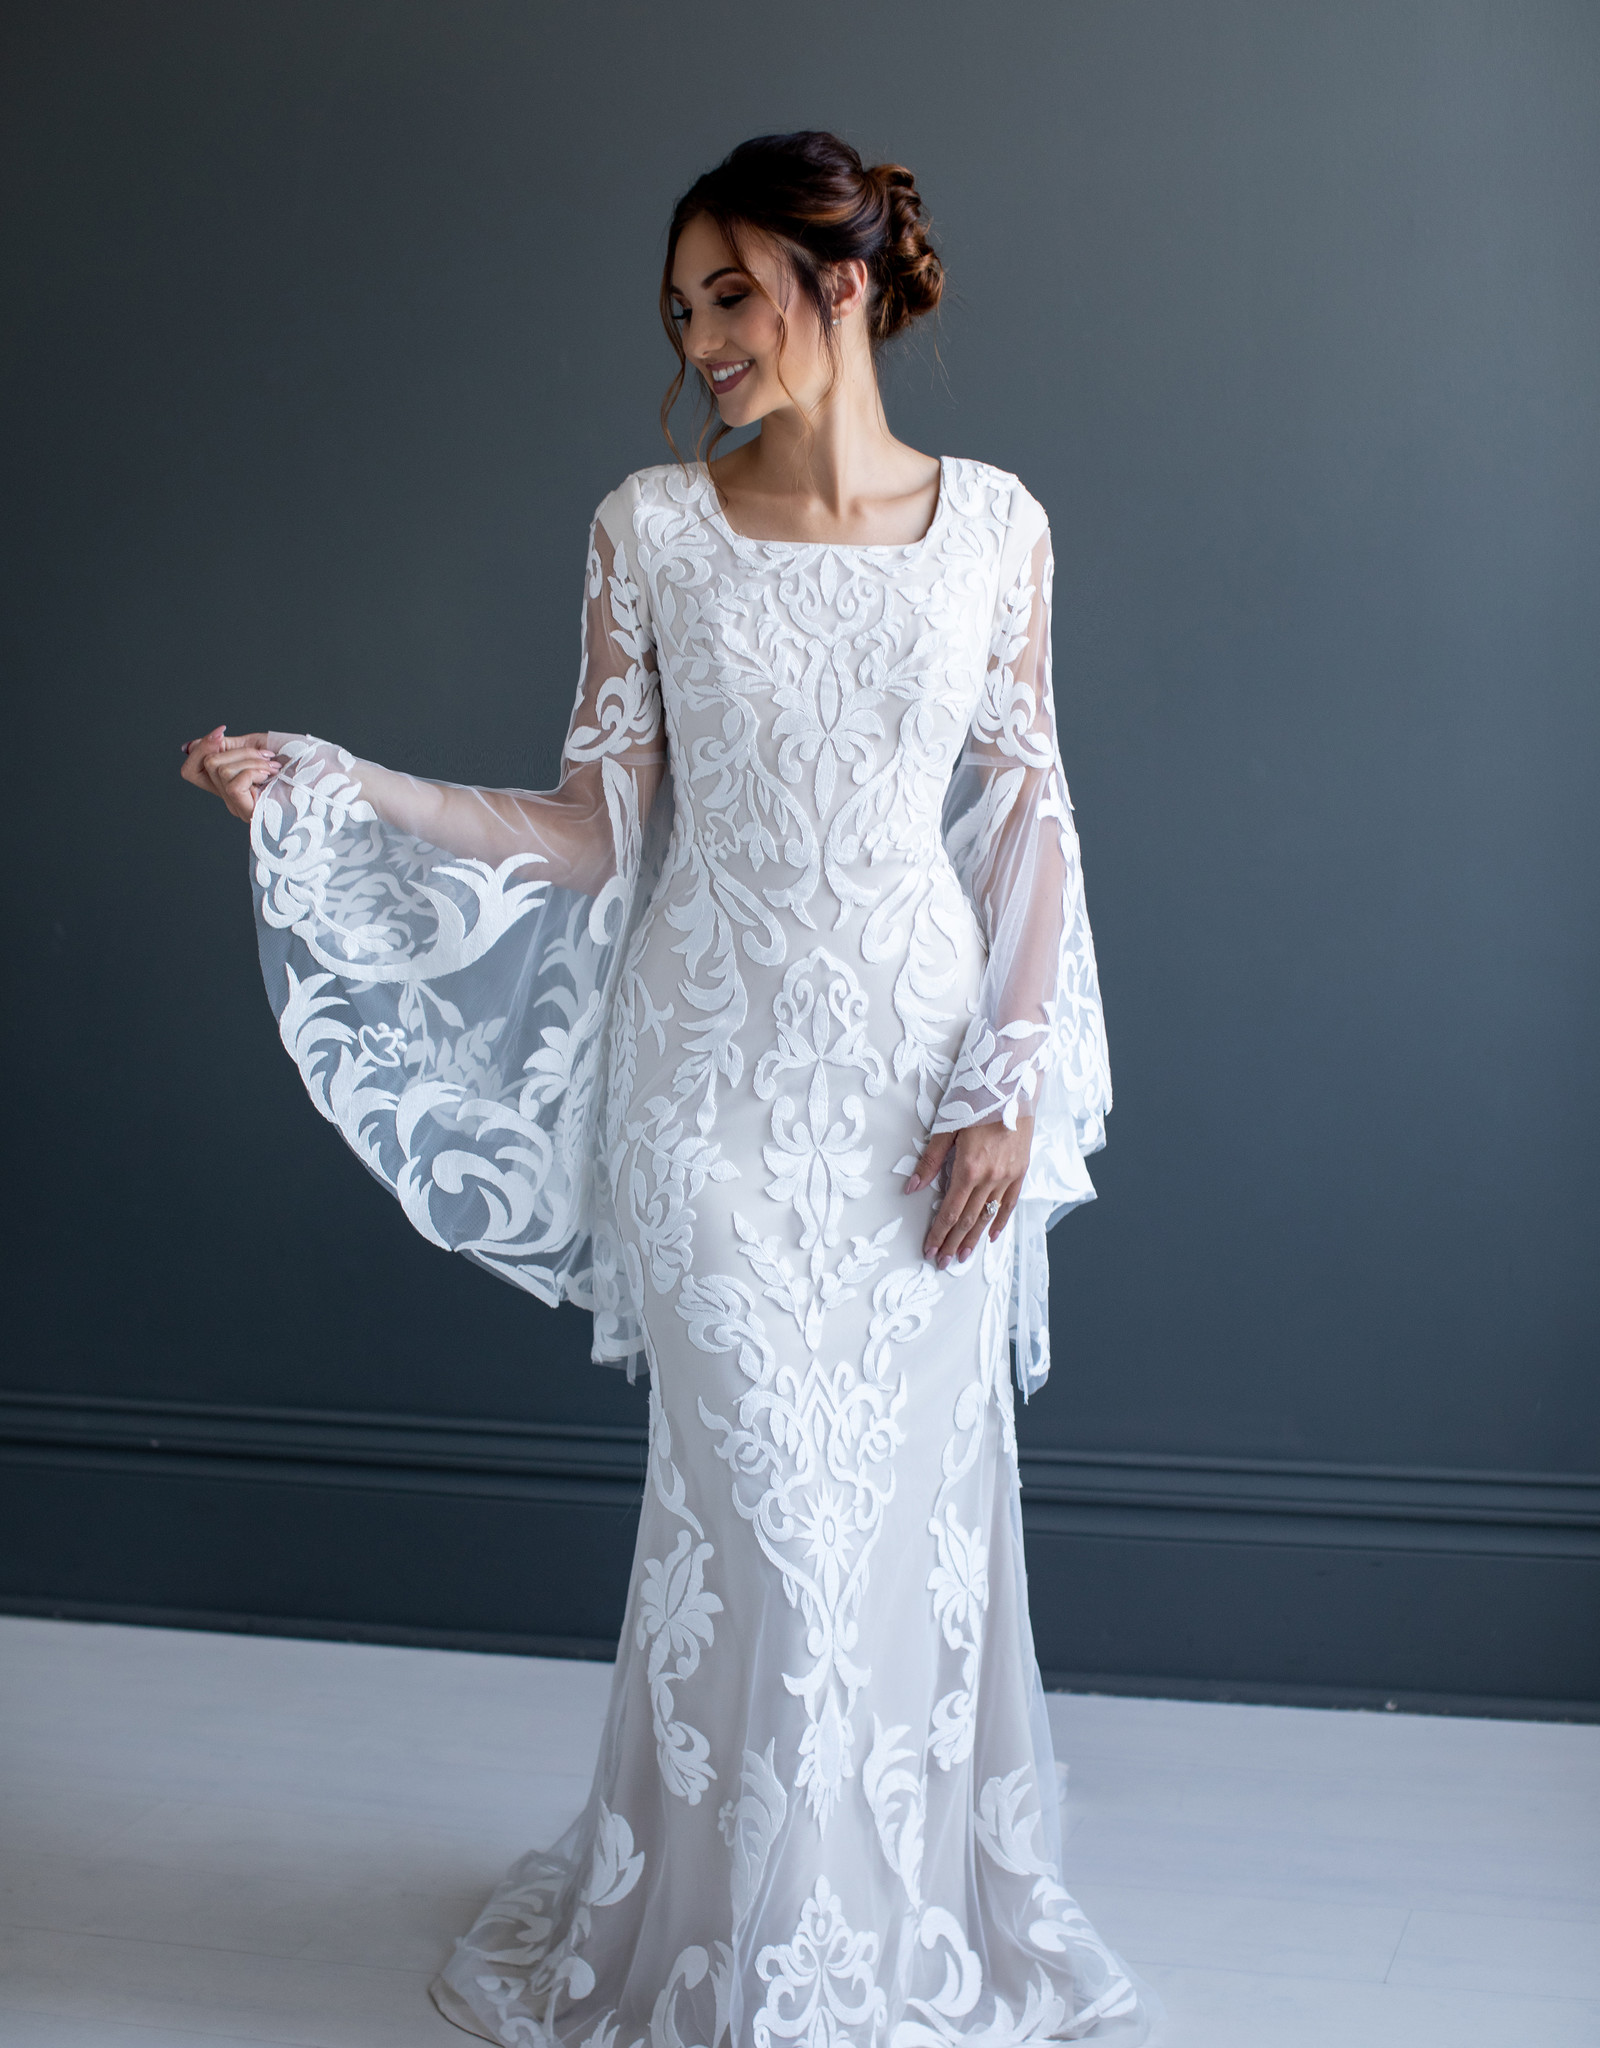 The Modest Bridal Collection Madison